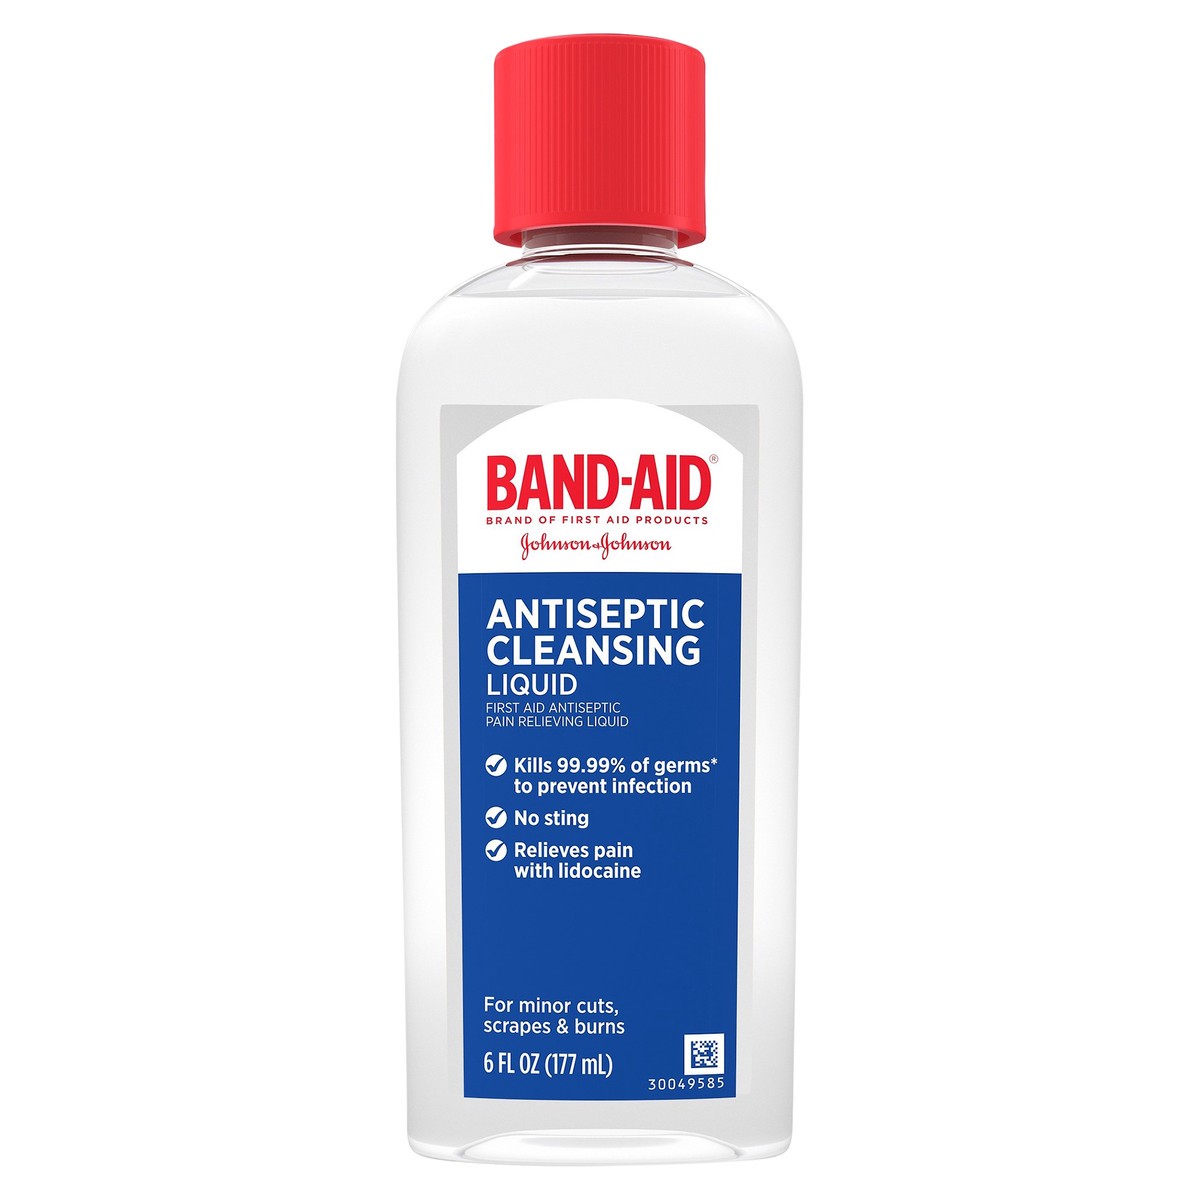 slide 1 of 7, BAND-AID Antiseptic Cleansing Liquid, First Aid Antiseptic Wash Relieves Pain & Kills Germs, with Benzalkonium Cl Wound Antiseptic & Lidocaine HCl Topical Analgesic, 6 fl. oz, 6 fl oz